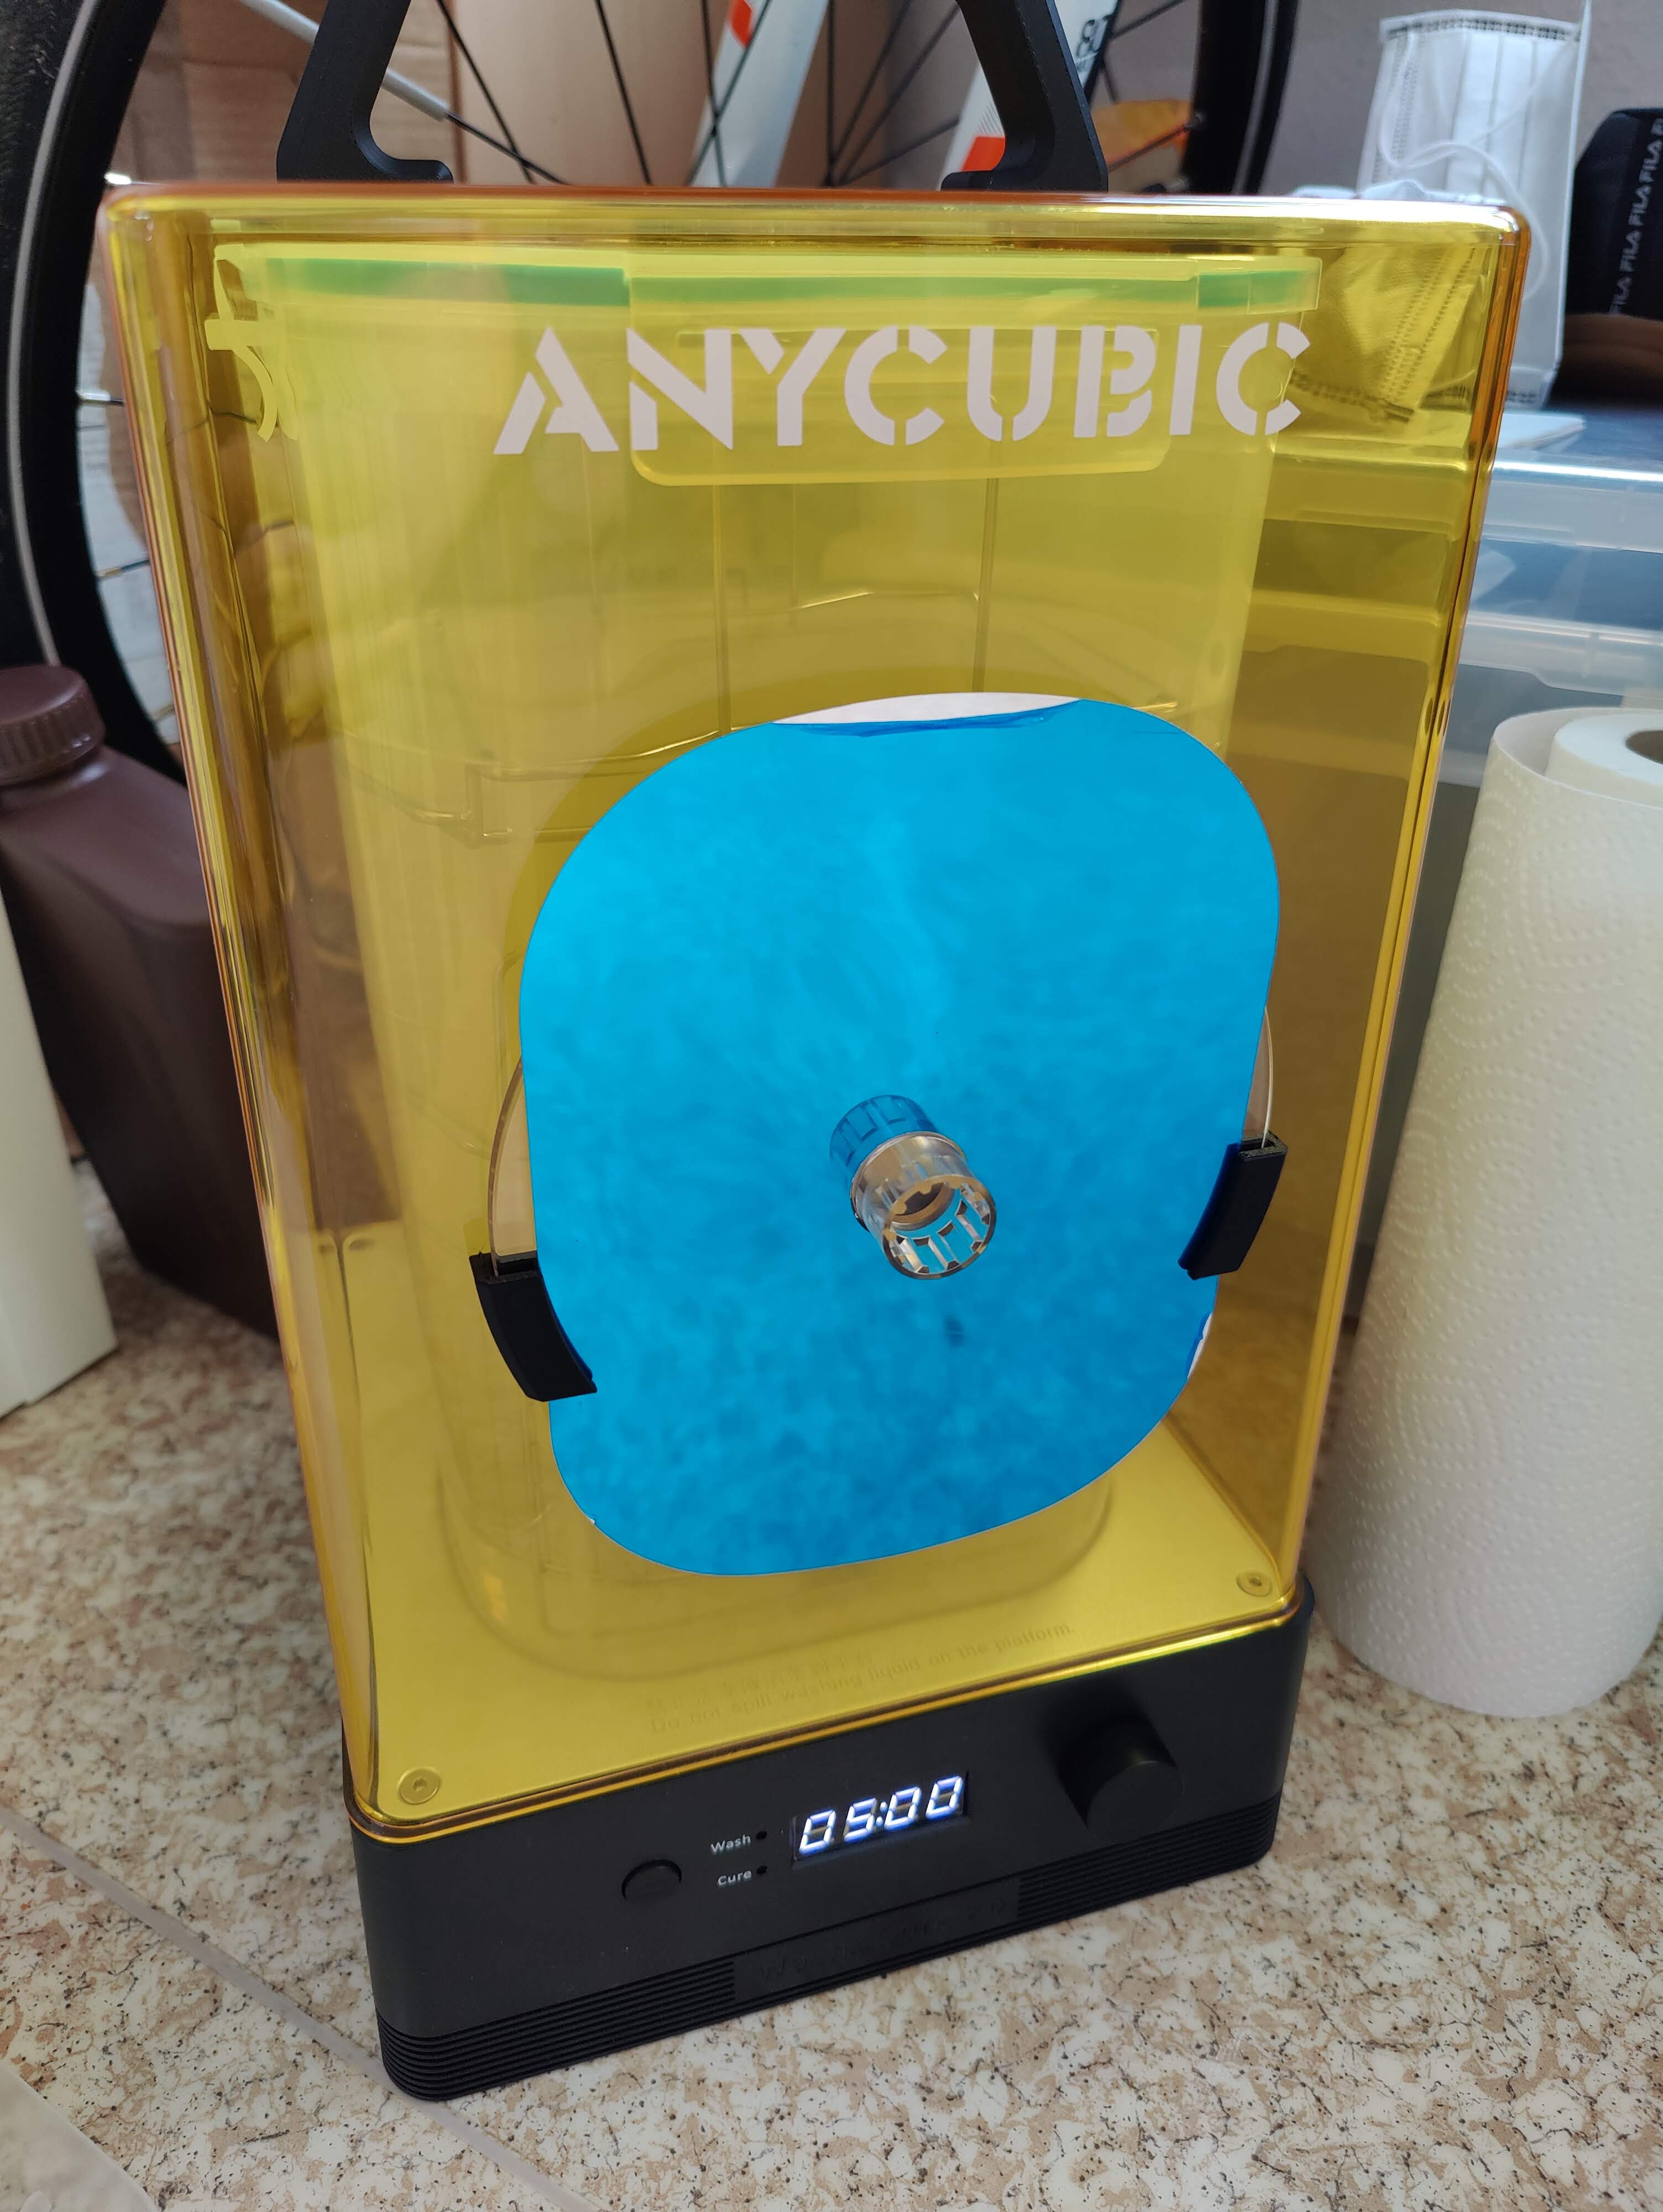 Anycubic Wash and Cure Upgrade main board